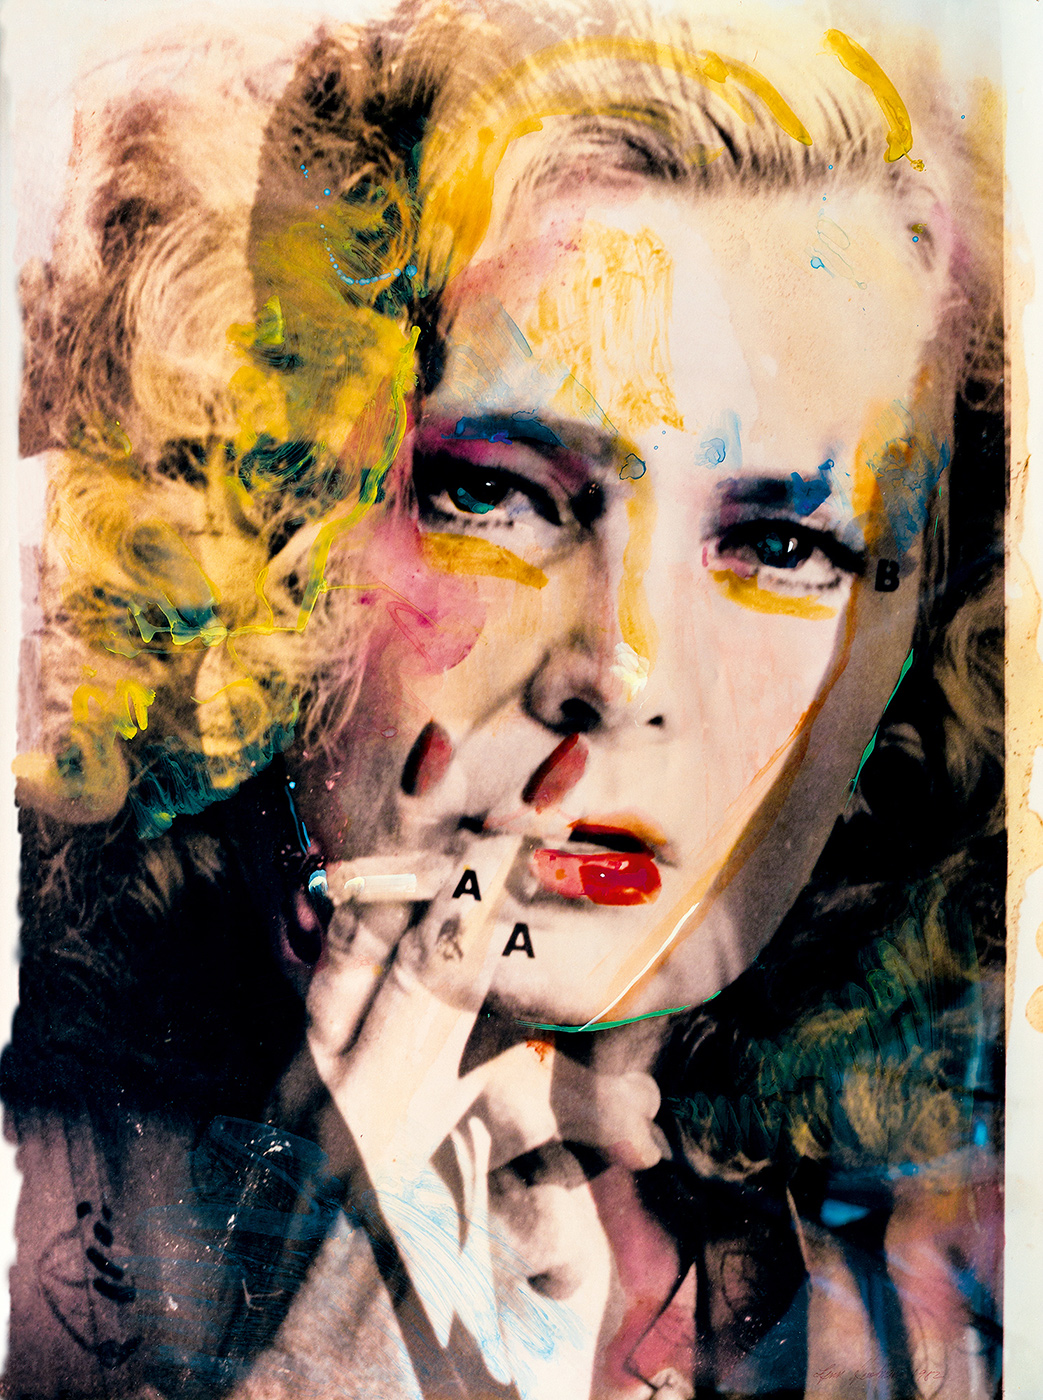  Lynn Hershman Leeson, Rowlands/Bogart (Female Dominant), 1982, from the series Hero Sandwich. Hand-painted collage. Courtesy the artist and Bridget Donahue, New York 